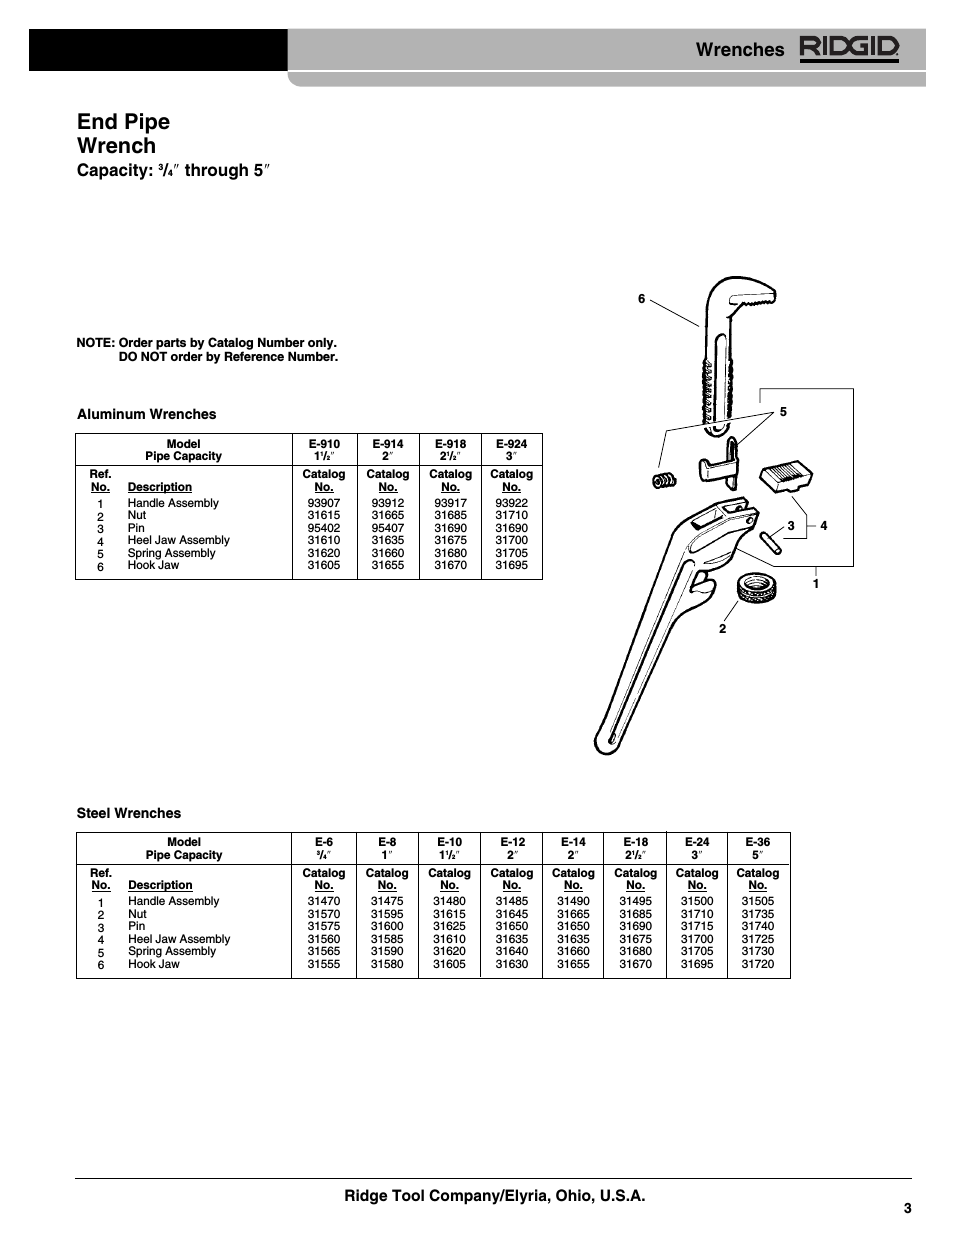 Aluminium End Pipe Wrench